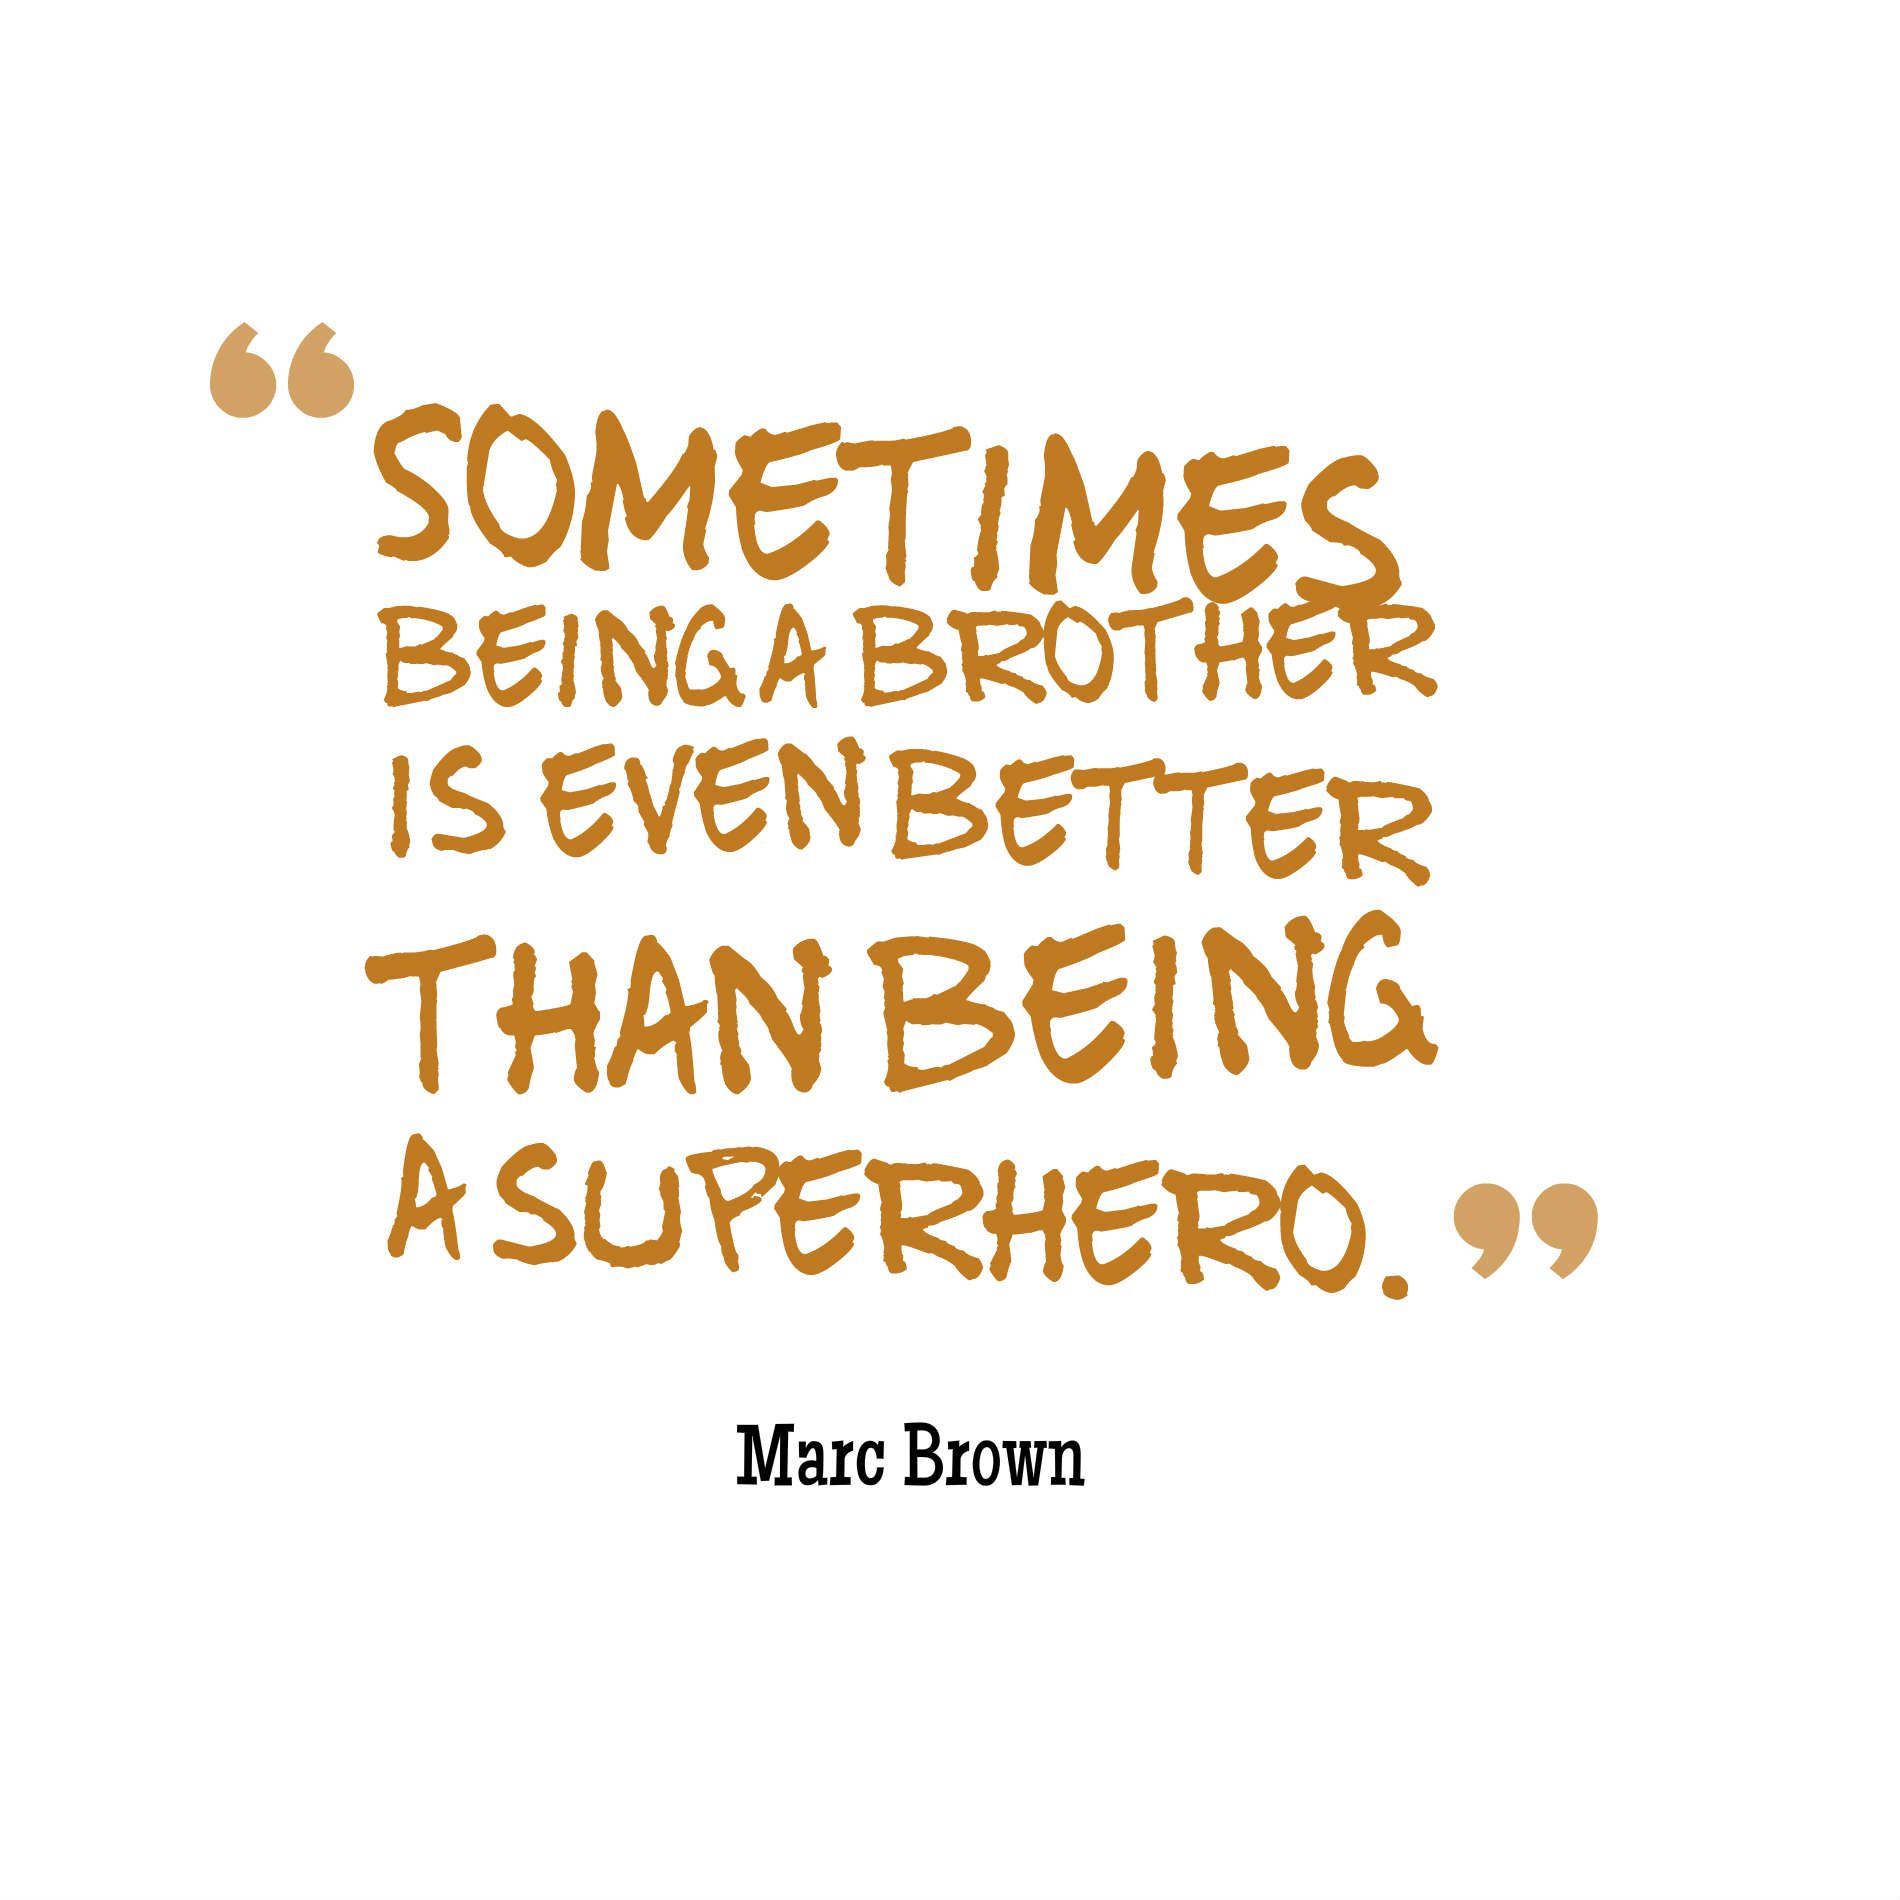 Sometimes being a brother is even better than being a superhero.